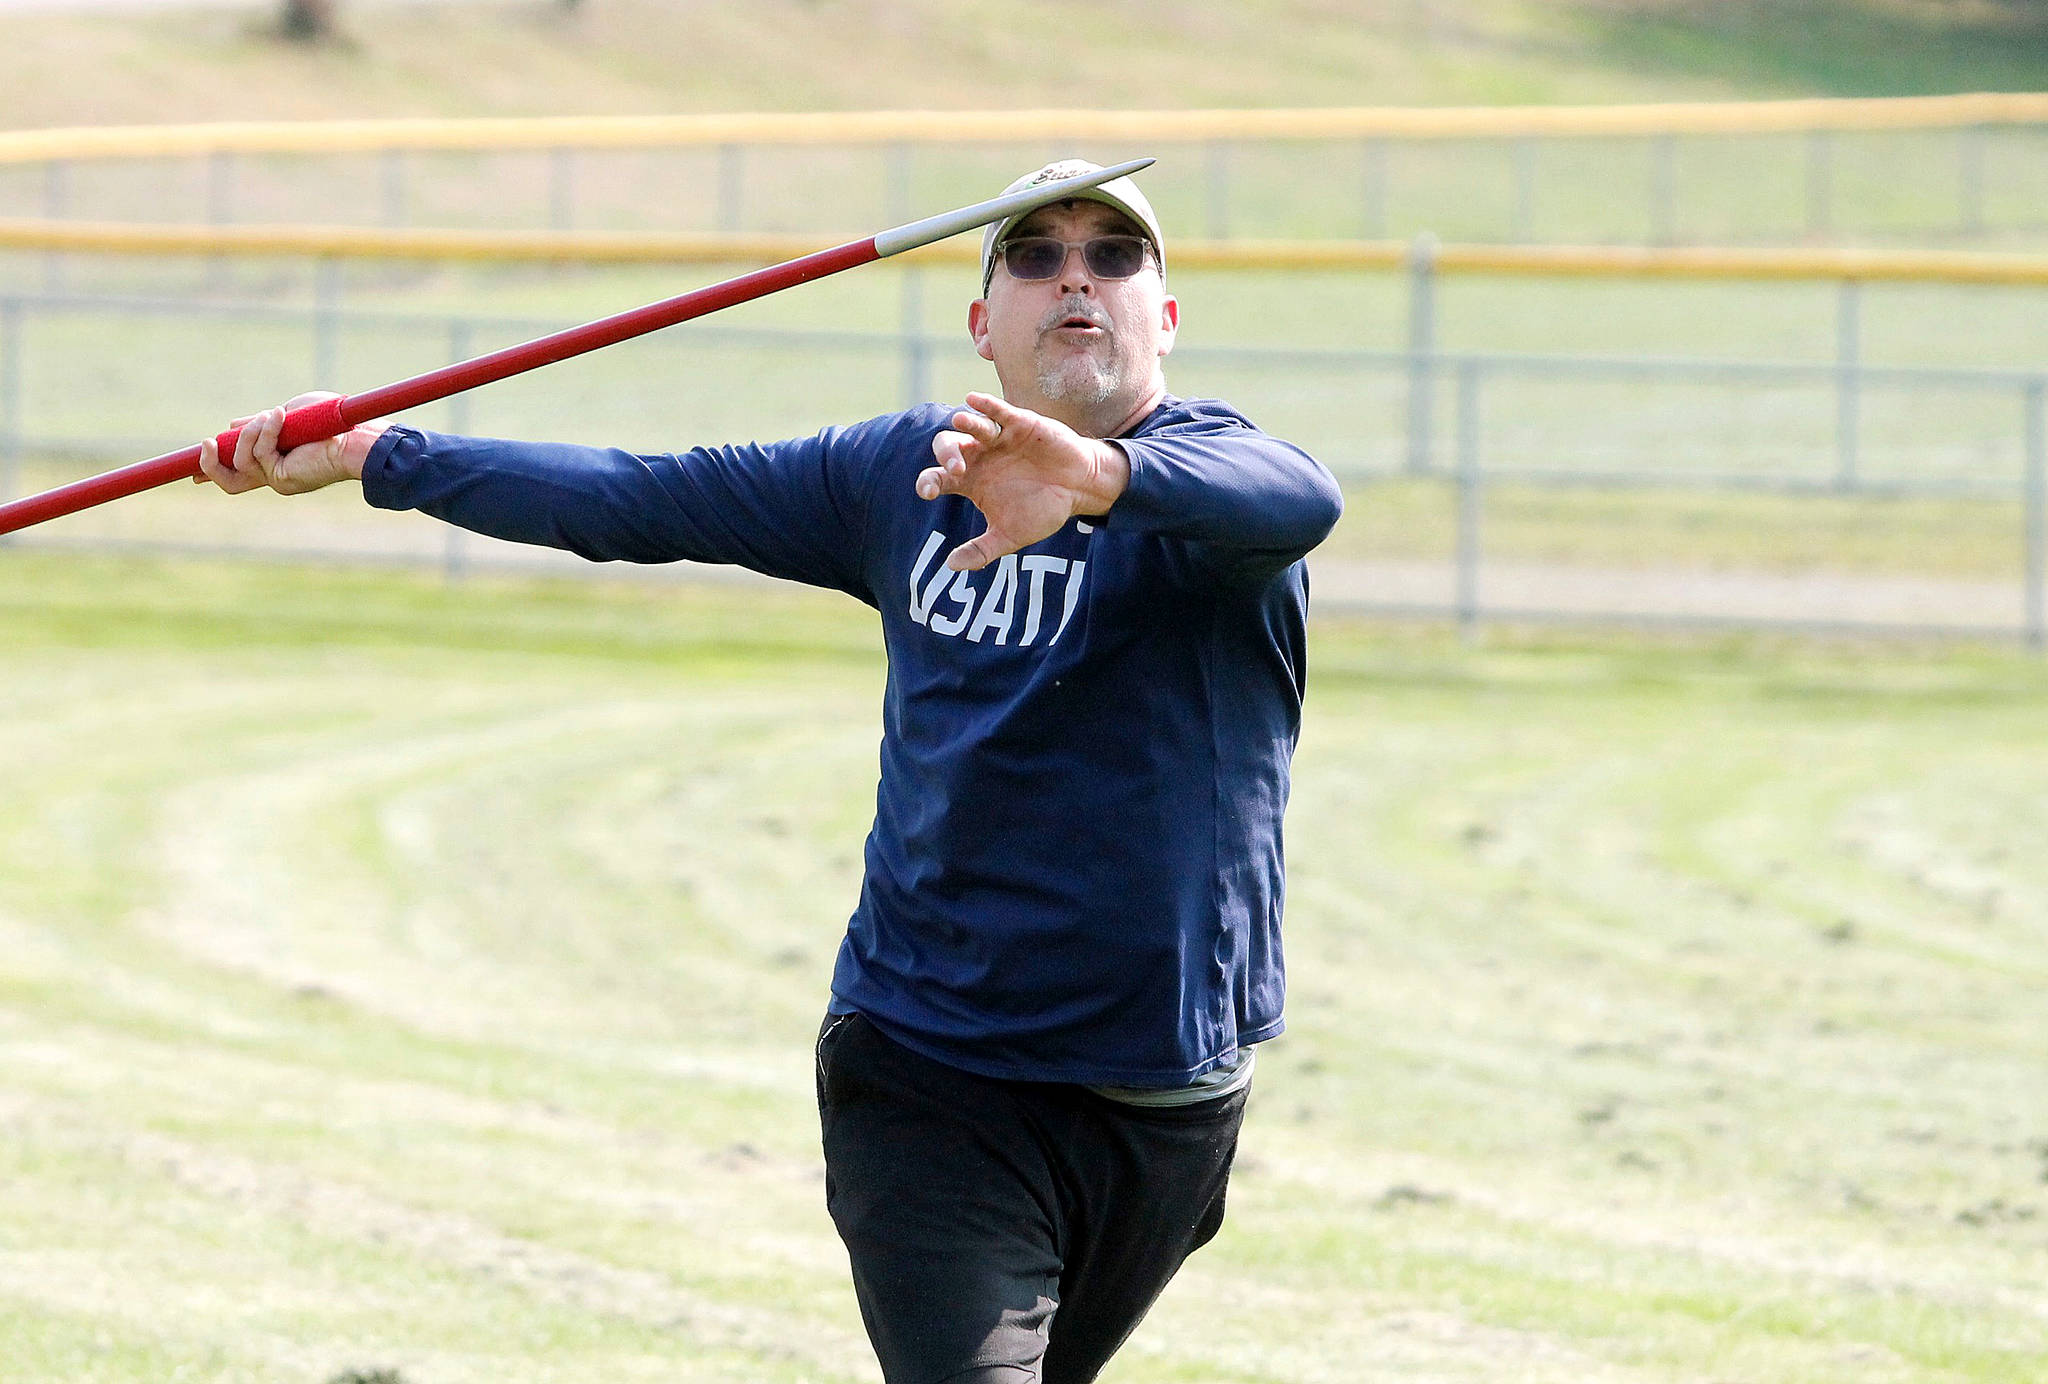 Mark Krulish | Bainbridge Island ReviewKingston resident Jon Claymore is hoping to win the World Masters Virtual Challenge javelin competition in his age group.